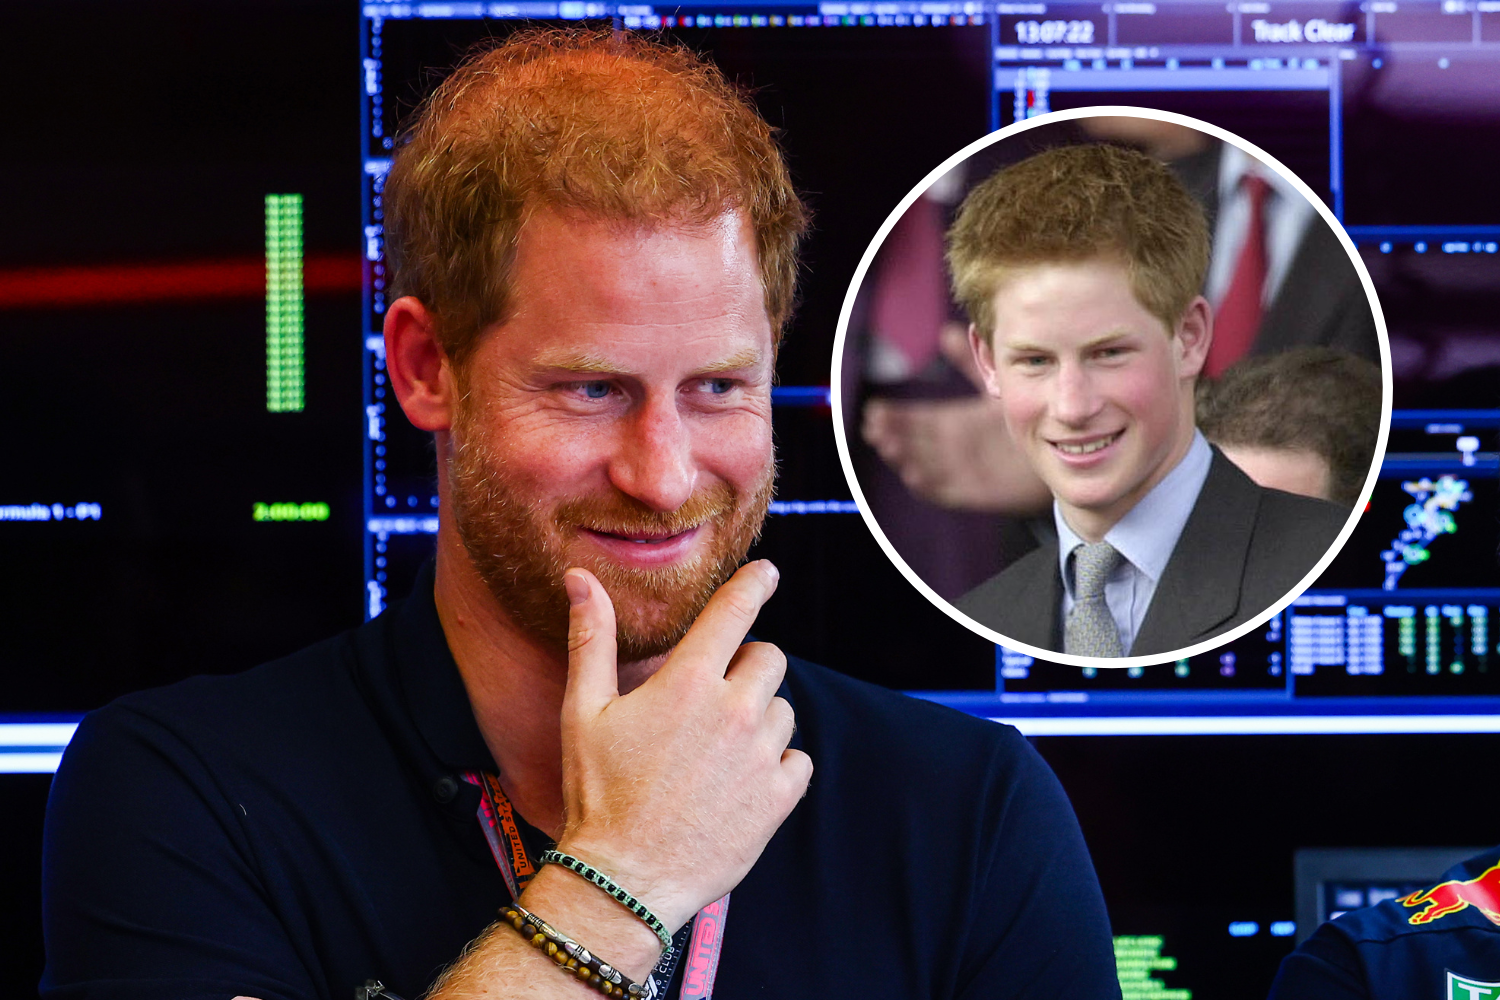 The Day Prince Harry Was Scolded By Butler For Drenching Girls